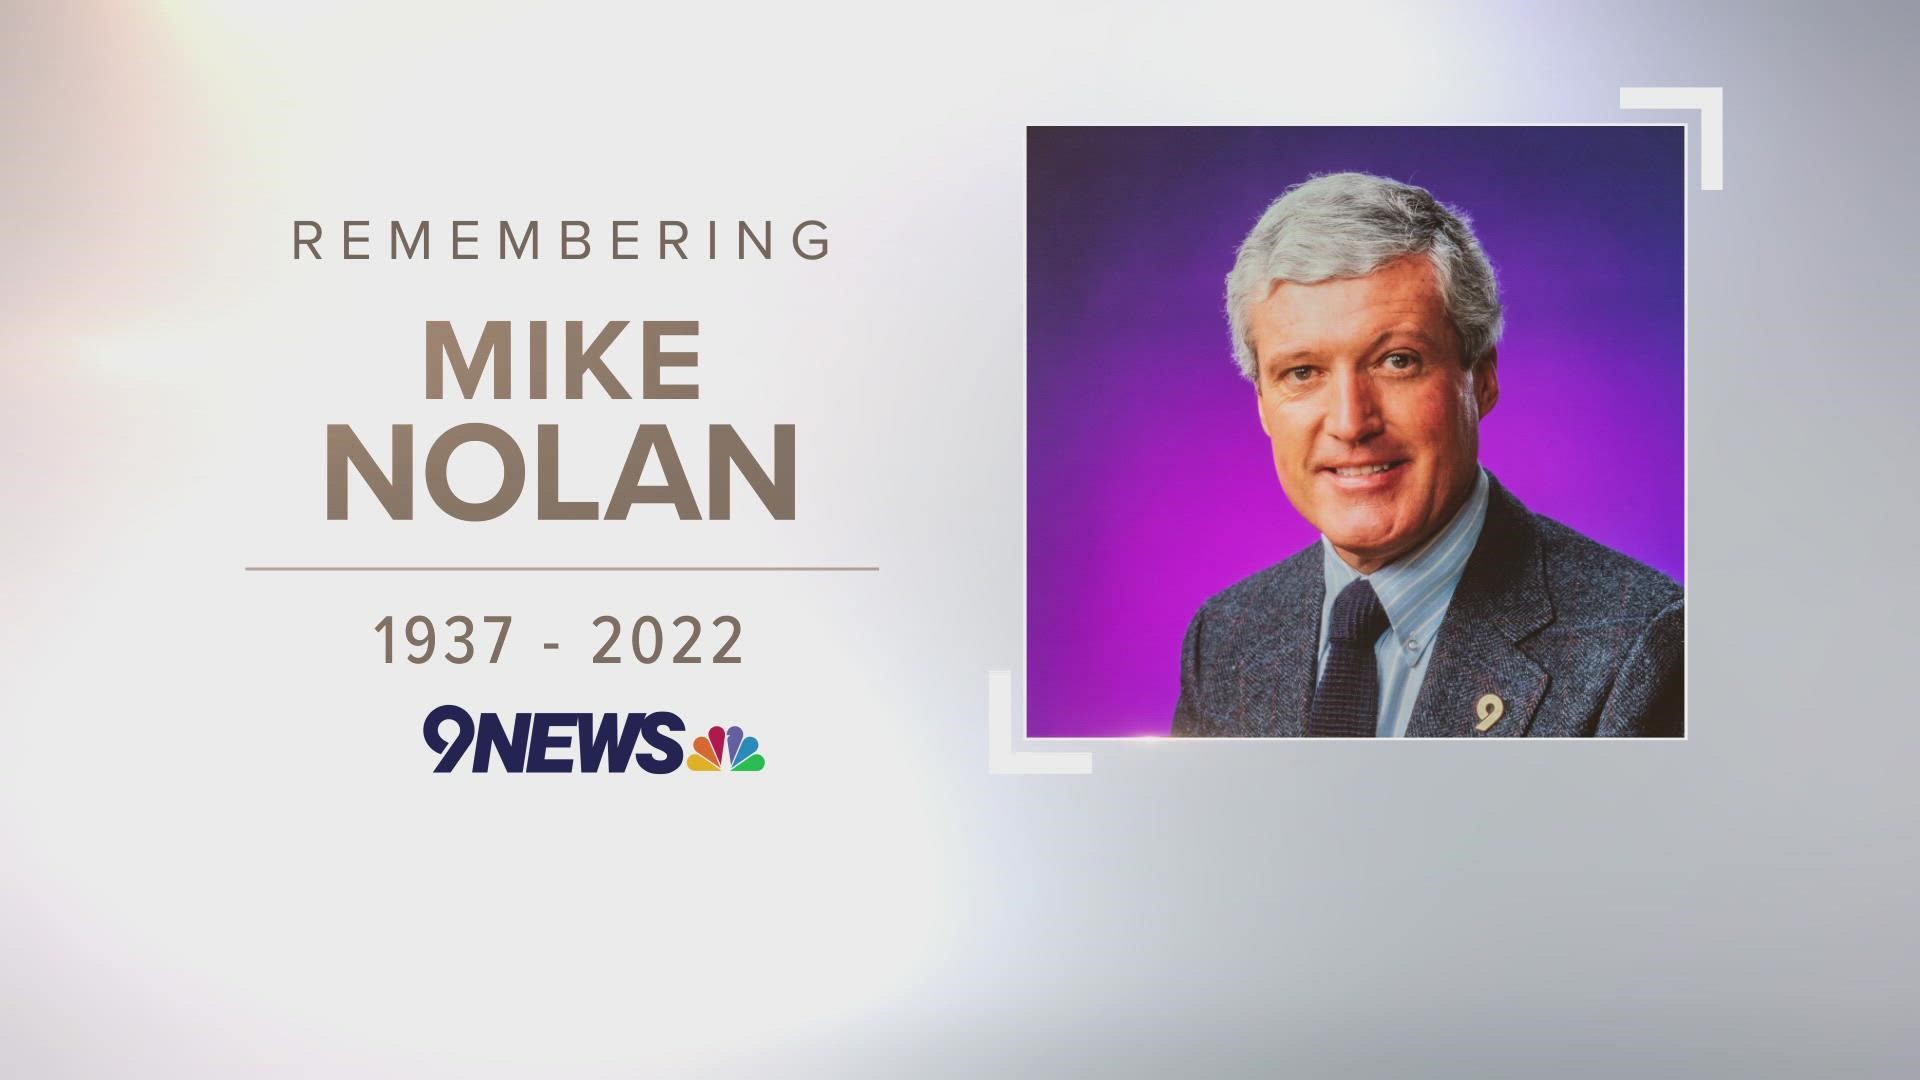 Mike Nolan, who passed away after a brief illness, began working for 9NEWS in the '70s. He stayed into the '90s and worked in Denver sports until retiring in 2004.